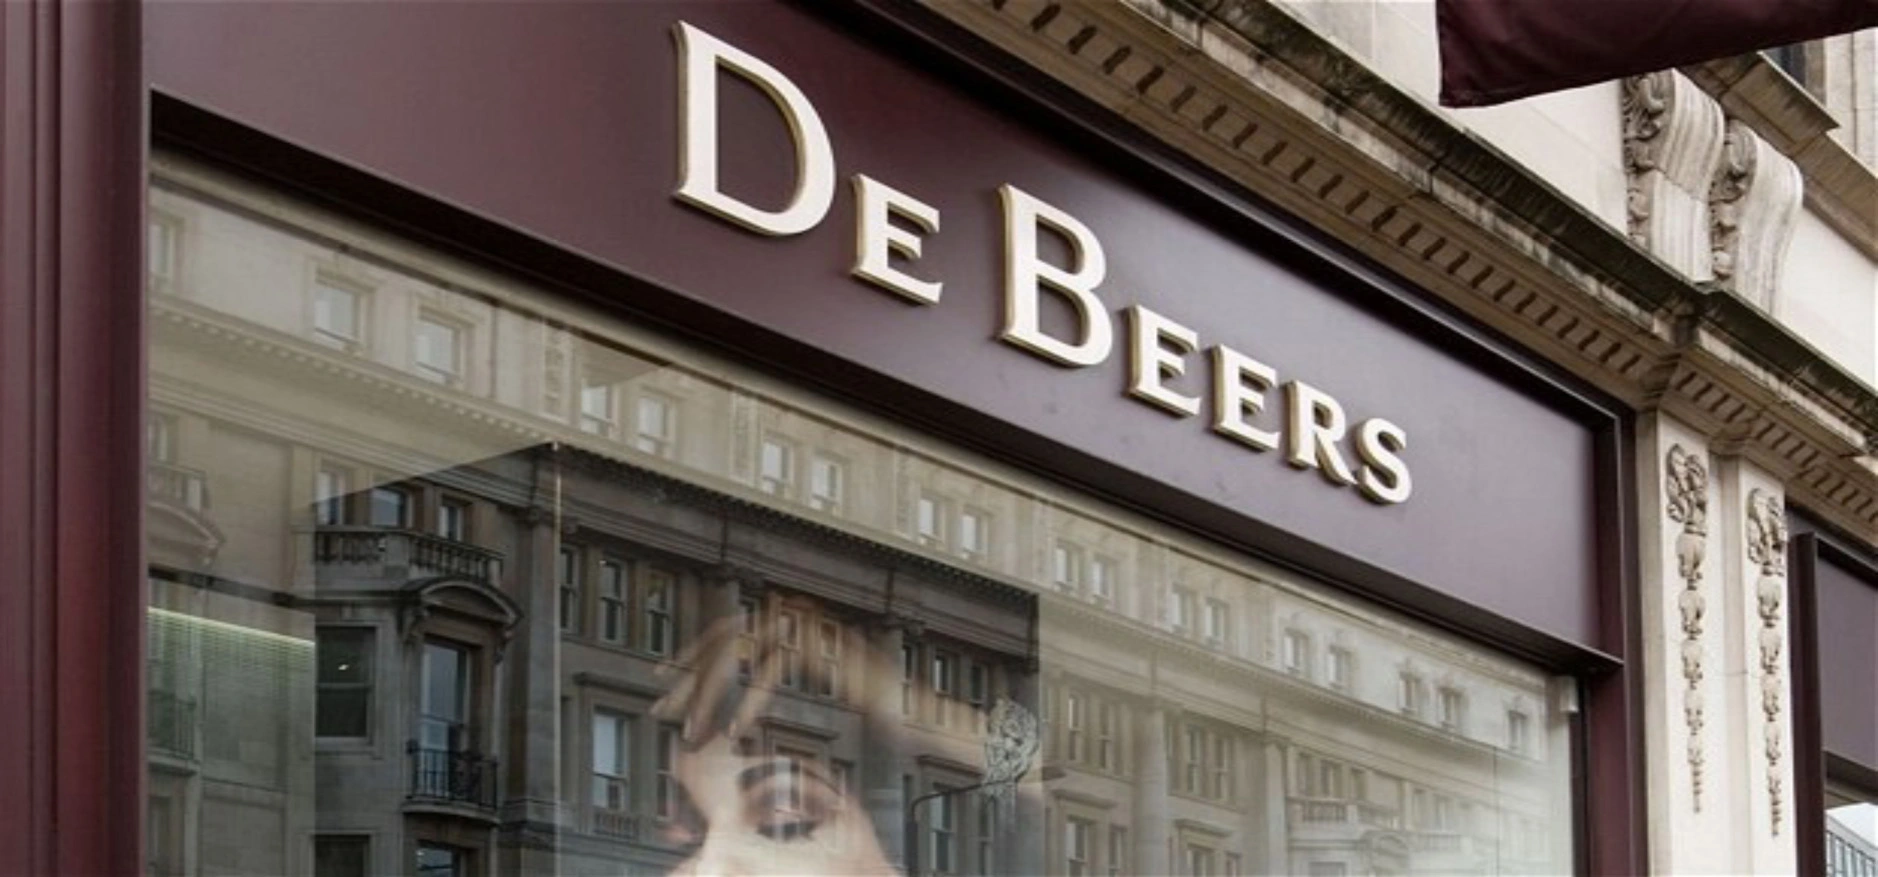 iC2 delivers ‘cutting edge’ CCTV system to De Beers